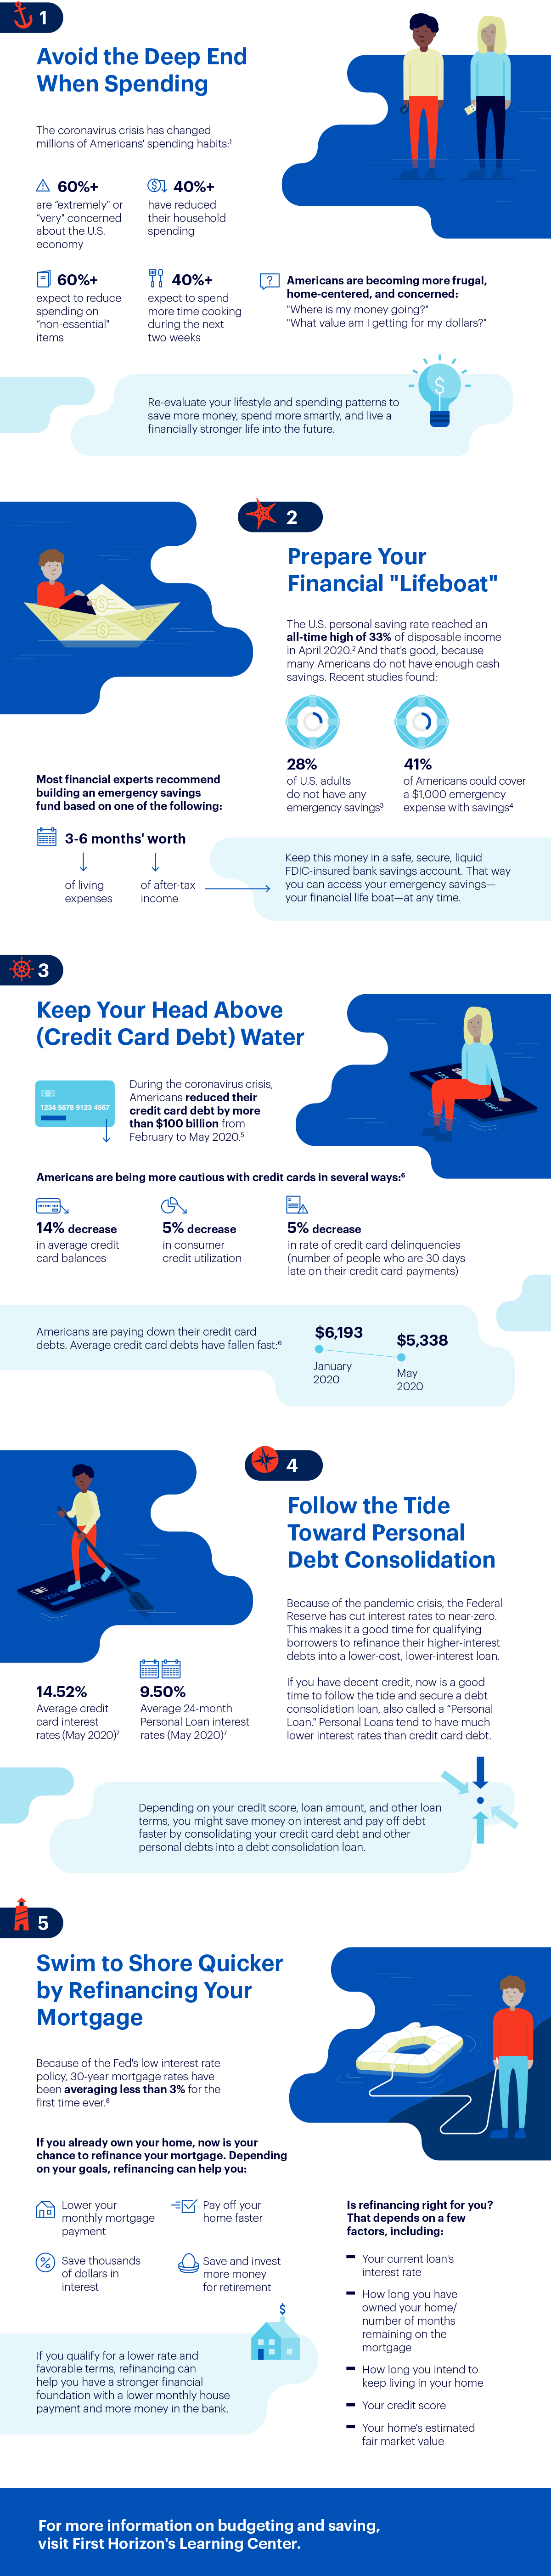 5 Tips to Keep Personal Finances Afloat infographic